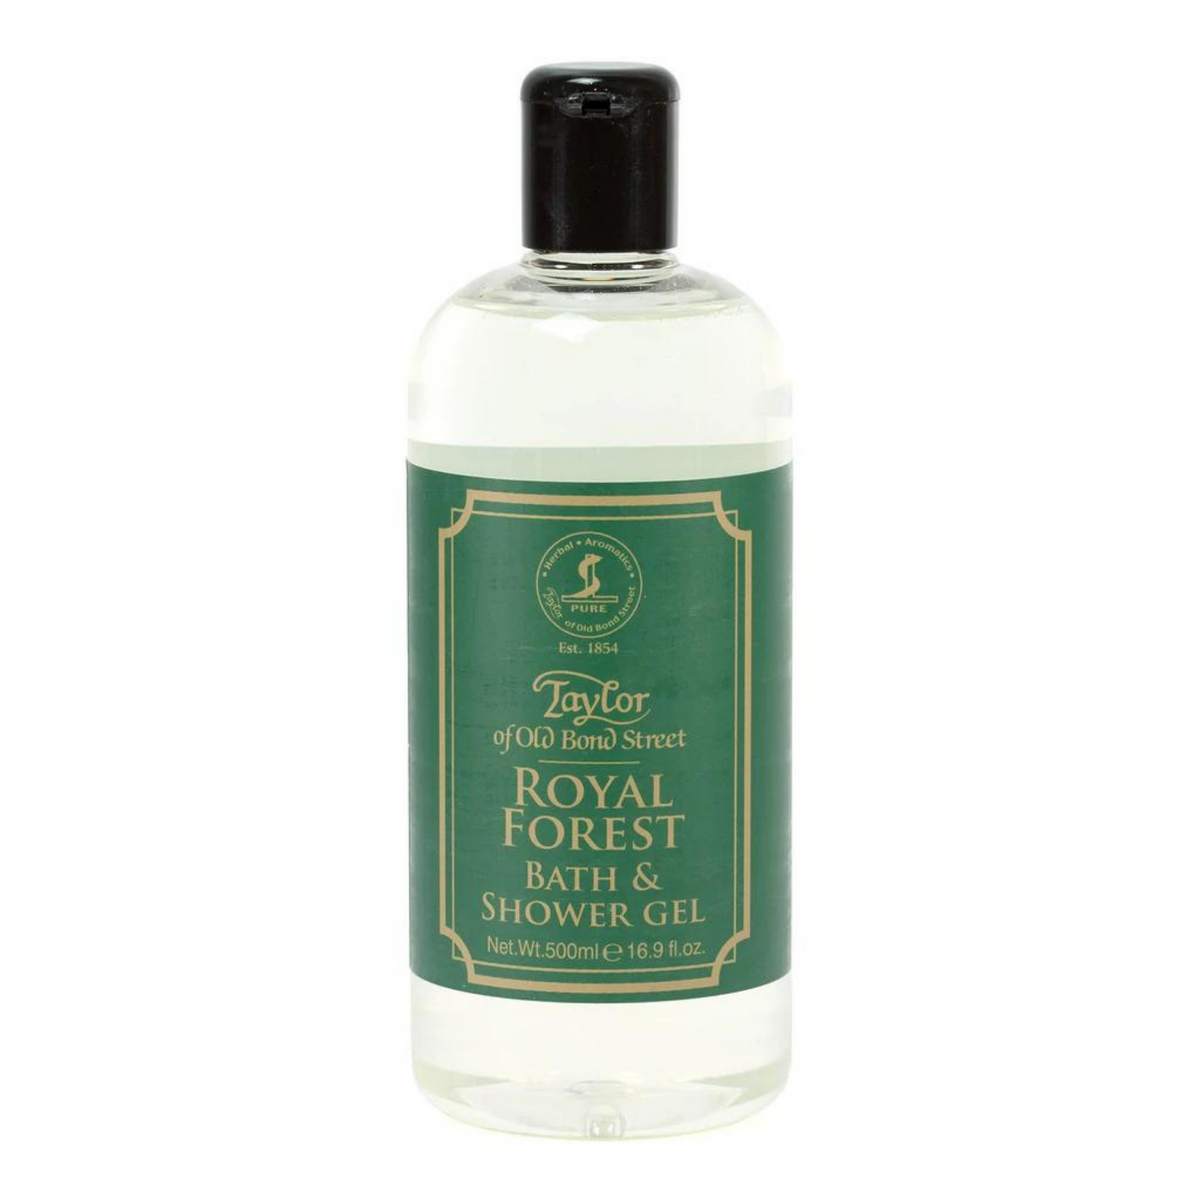 Primary Image of Royal Forest Bath and Shower Gel